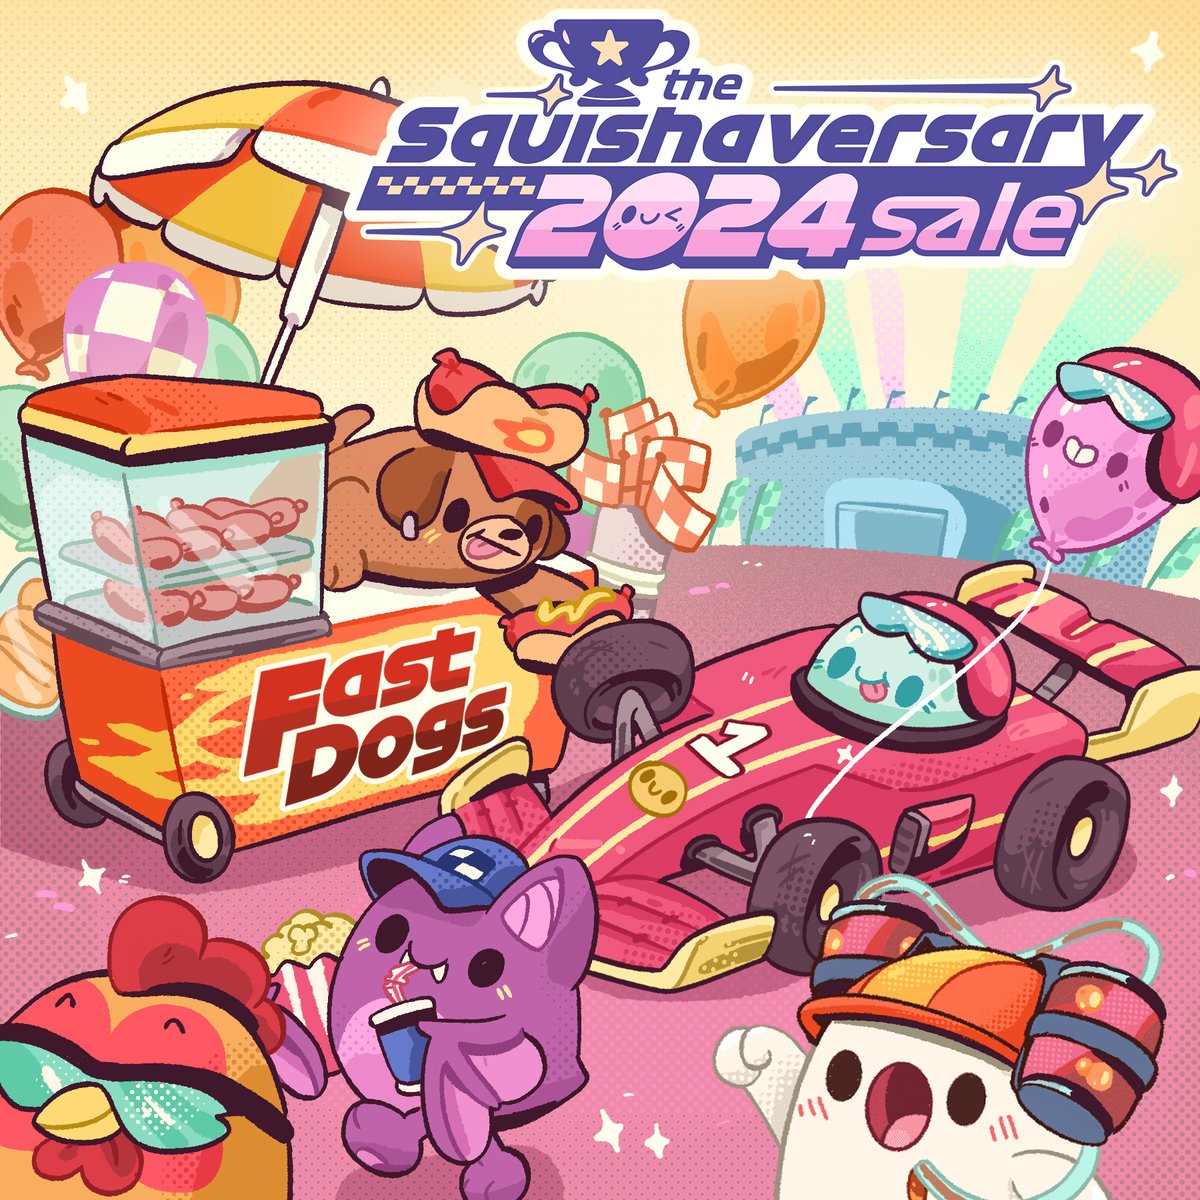 ARE Y'ALL EVEN READY FOR THIS SALE TOMORROW?!?!?! 🤯 🌭 squishable.com 🌭